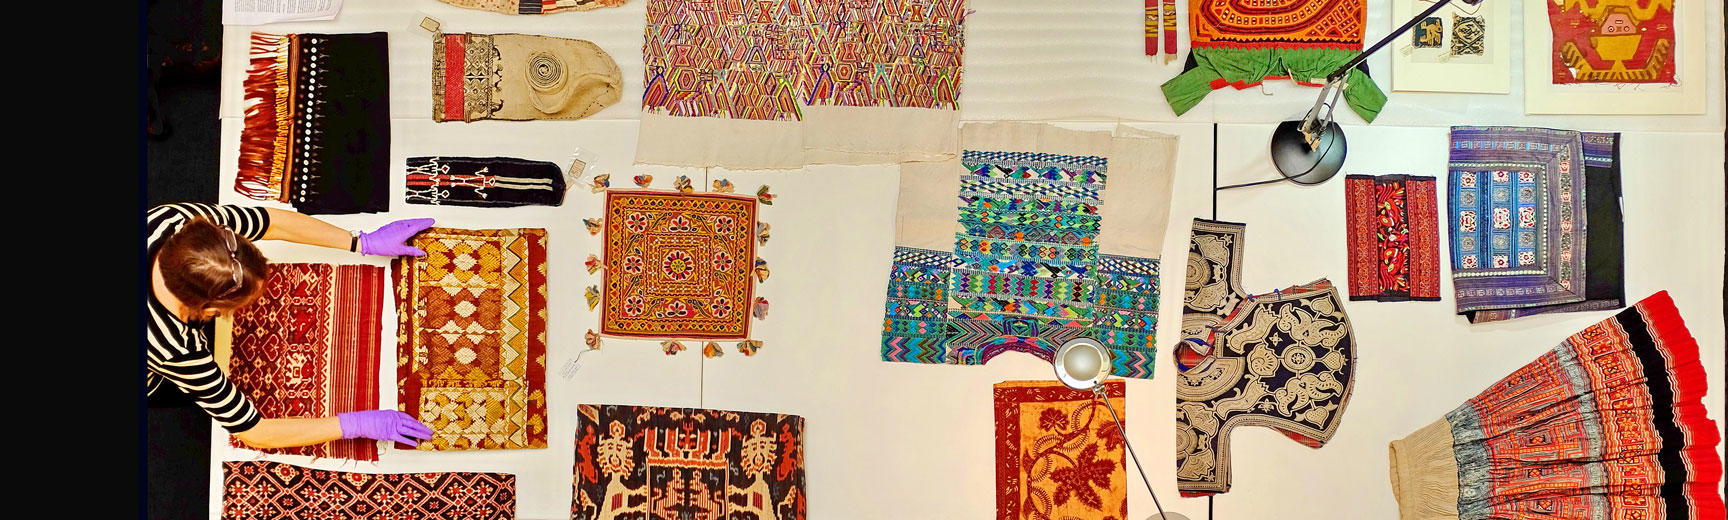 Curator preparing textile items for researchers